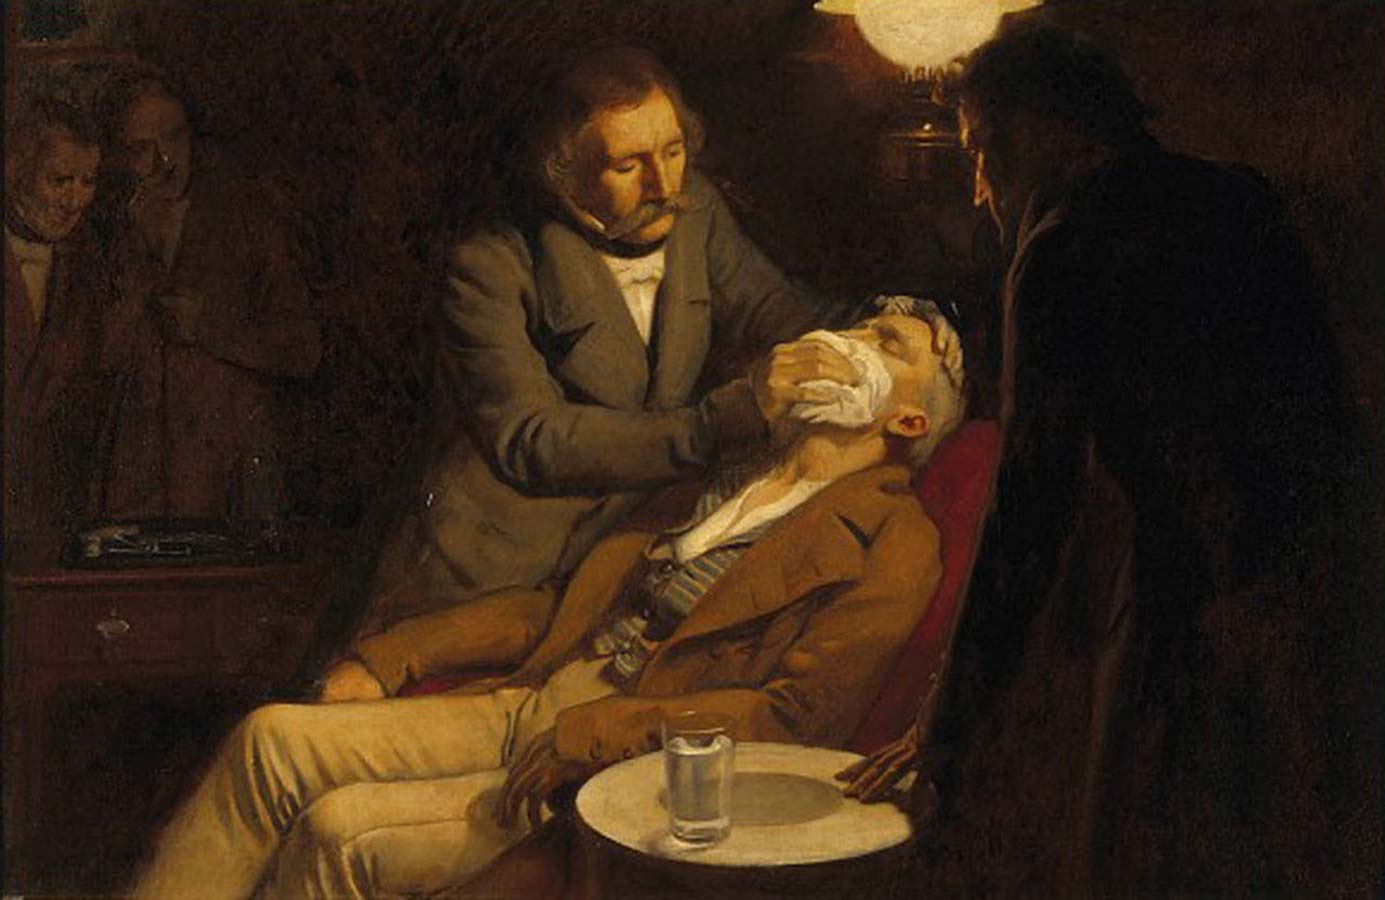 Painting of Dr. William T. G. Morton demonstrating the use of ether-induced anesthesia